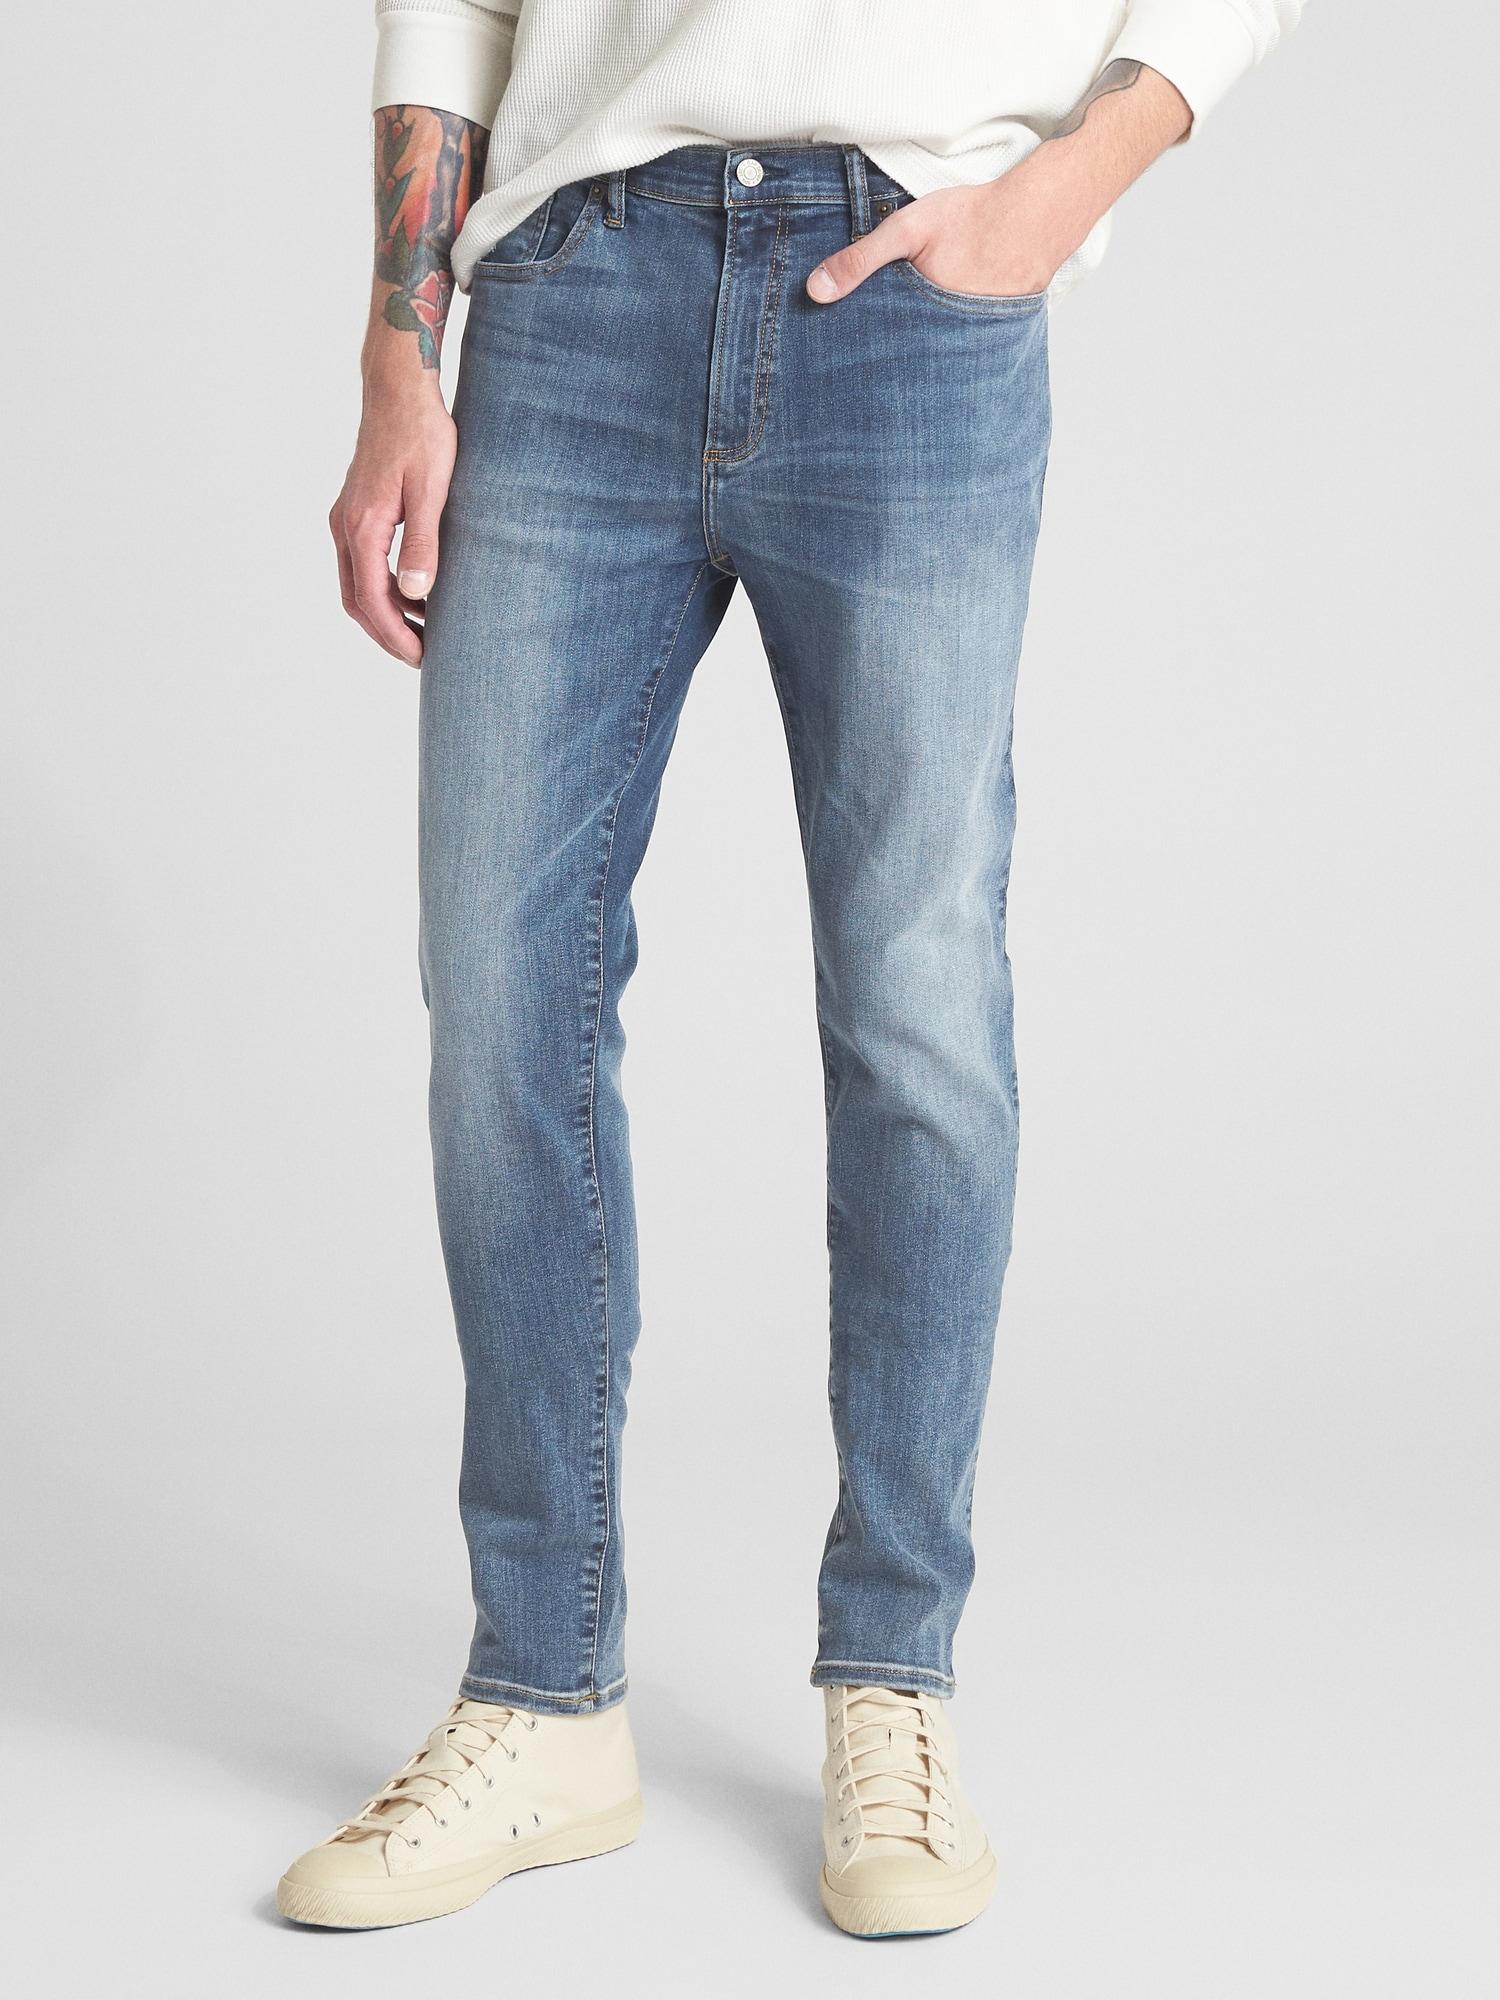 Gap Super Skinny Jeans With Flex in Blue for Men - Lyst